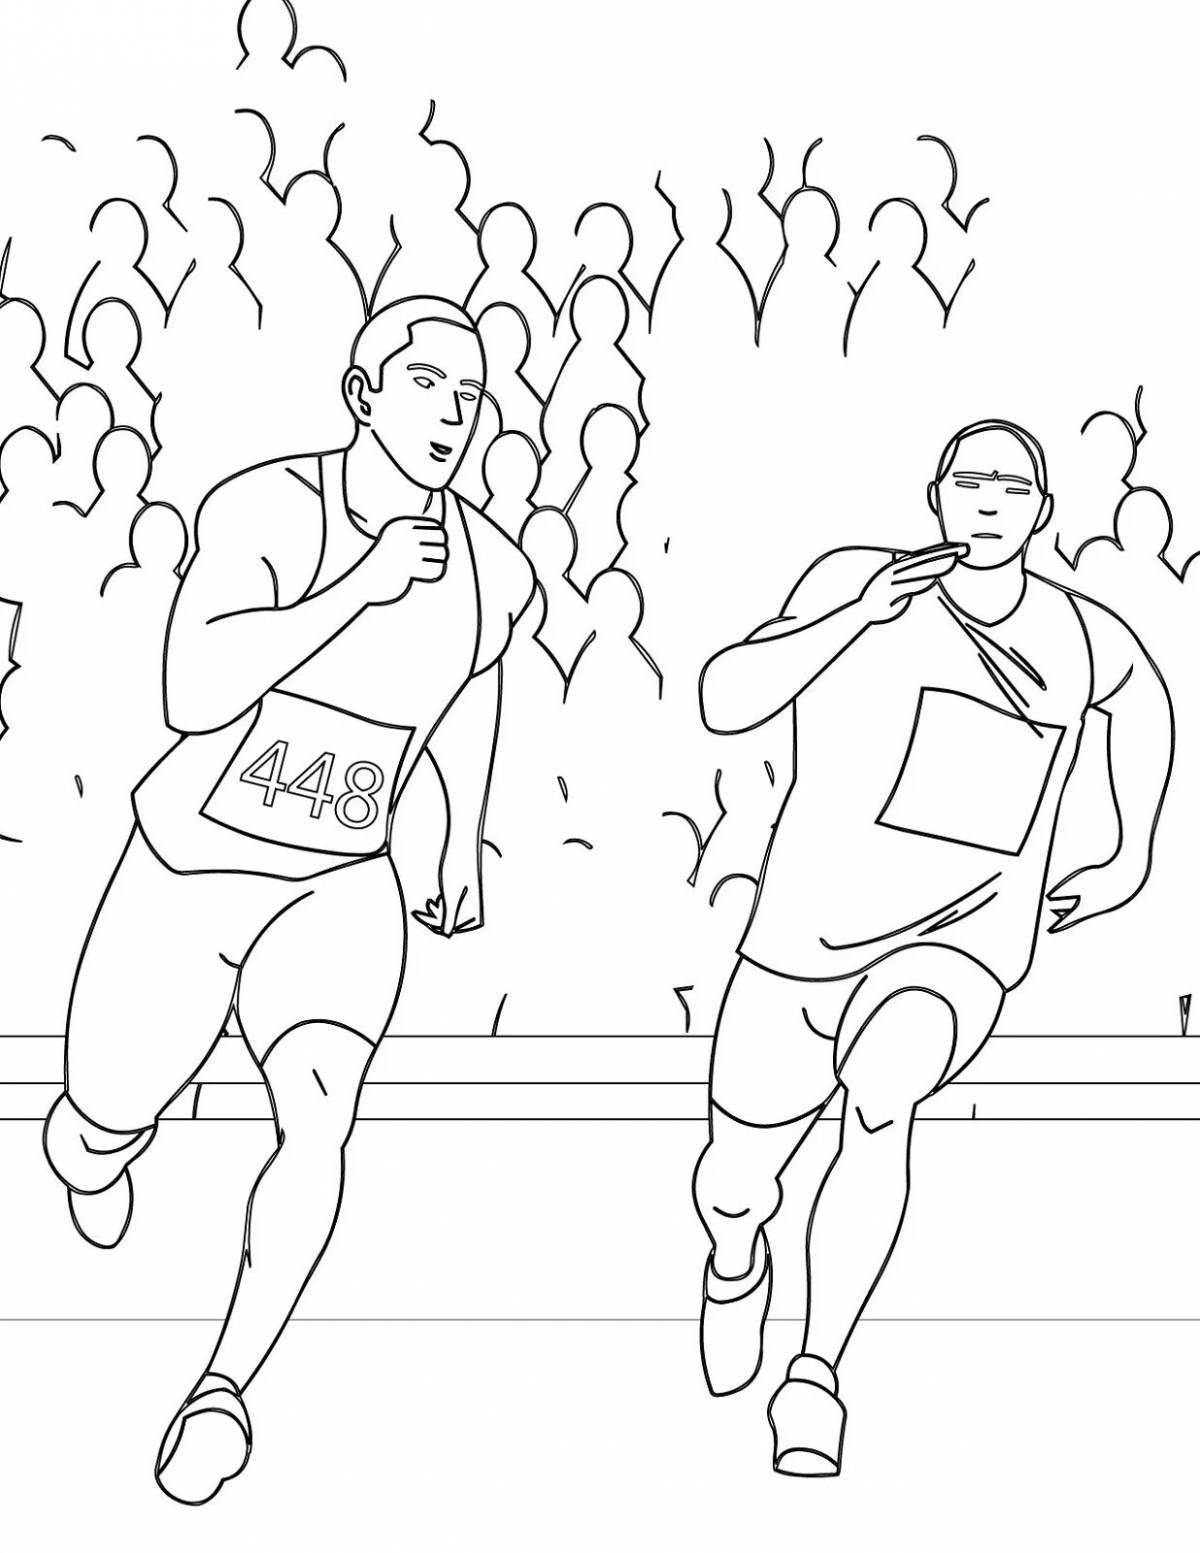 Colorful athletics coloring page